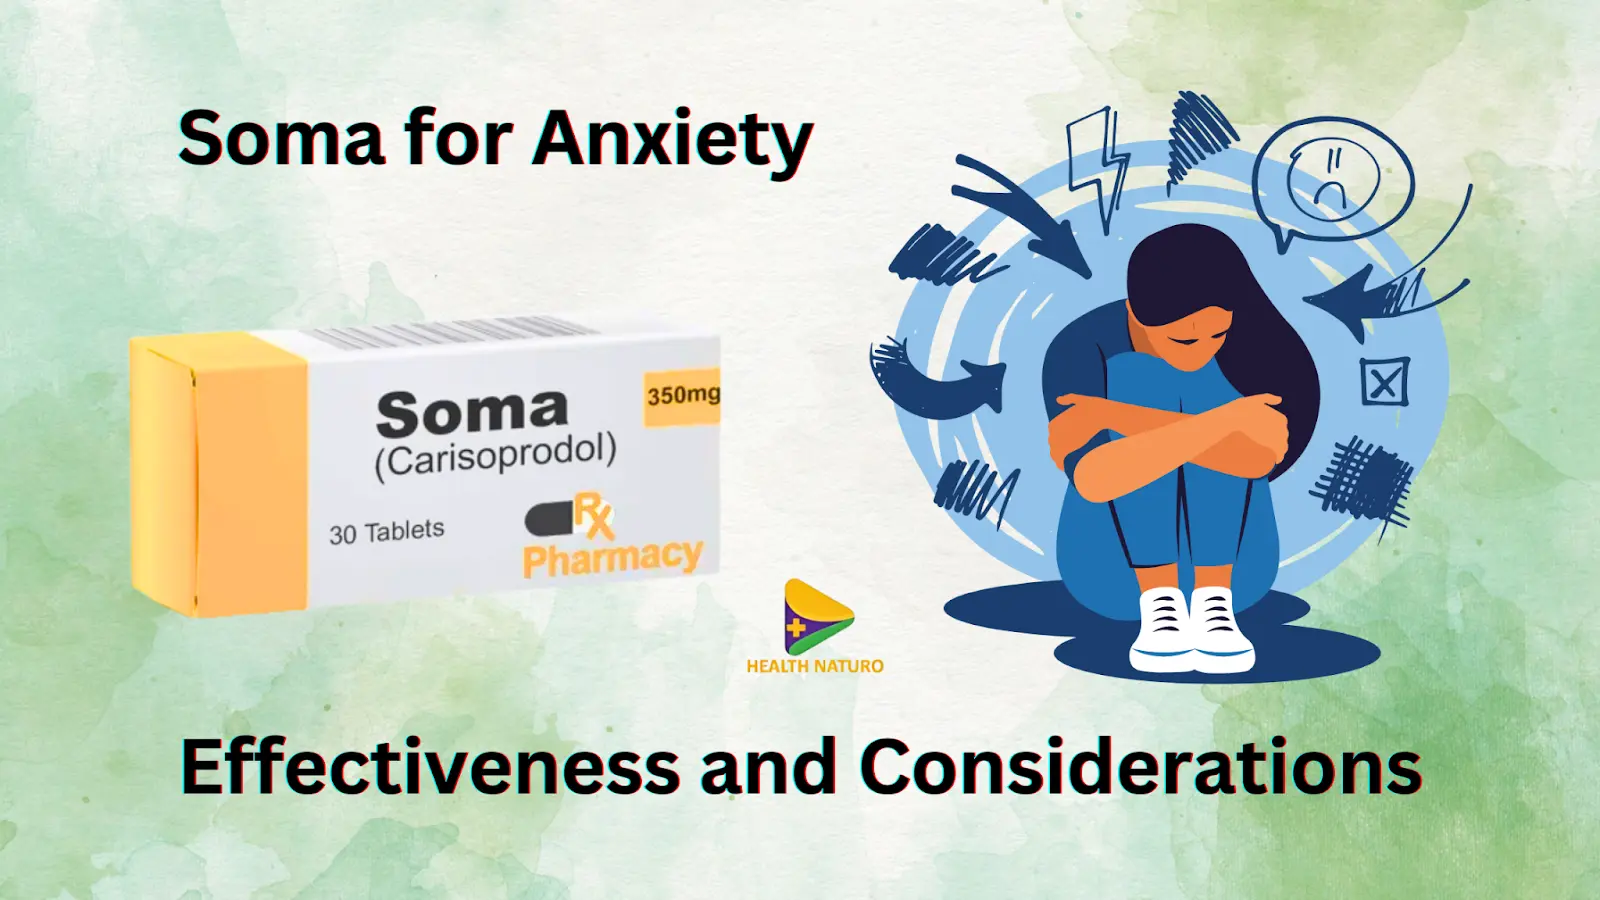 Soma for Anxiety: Effectiveness and Considerations